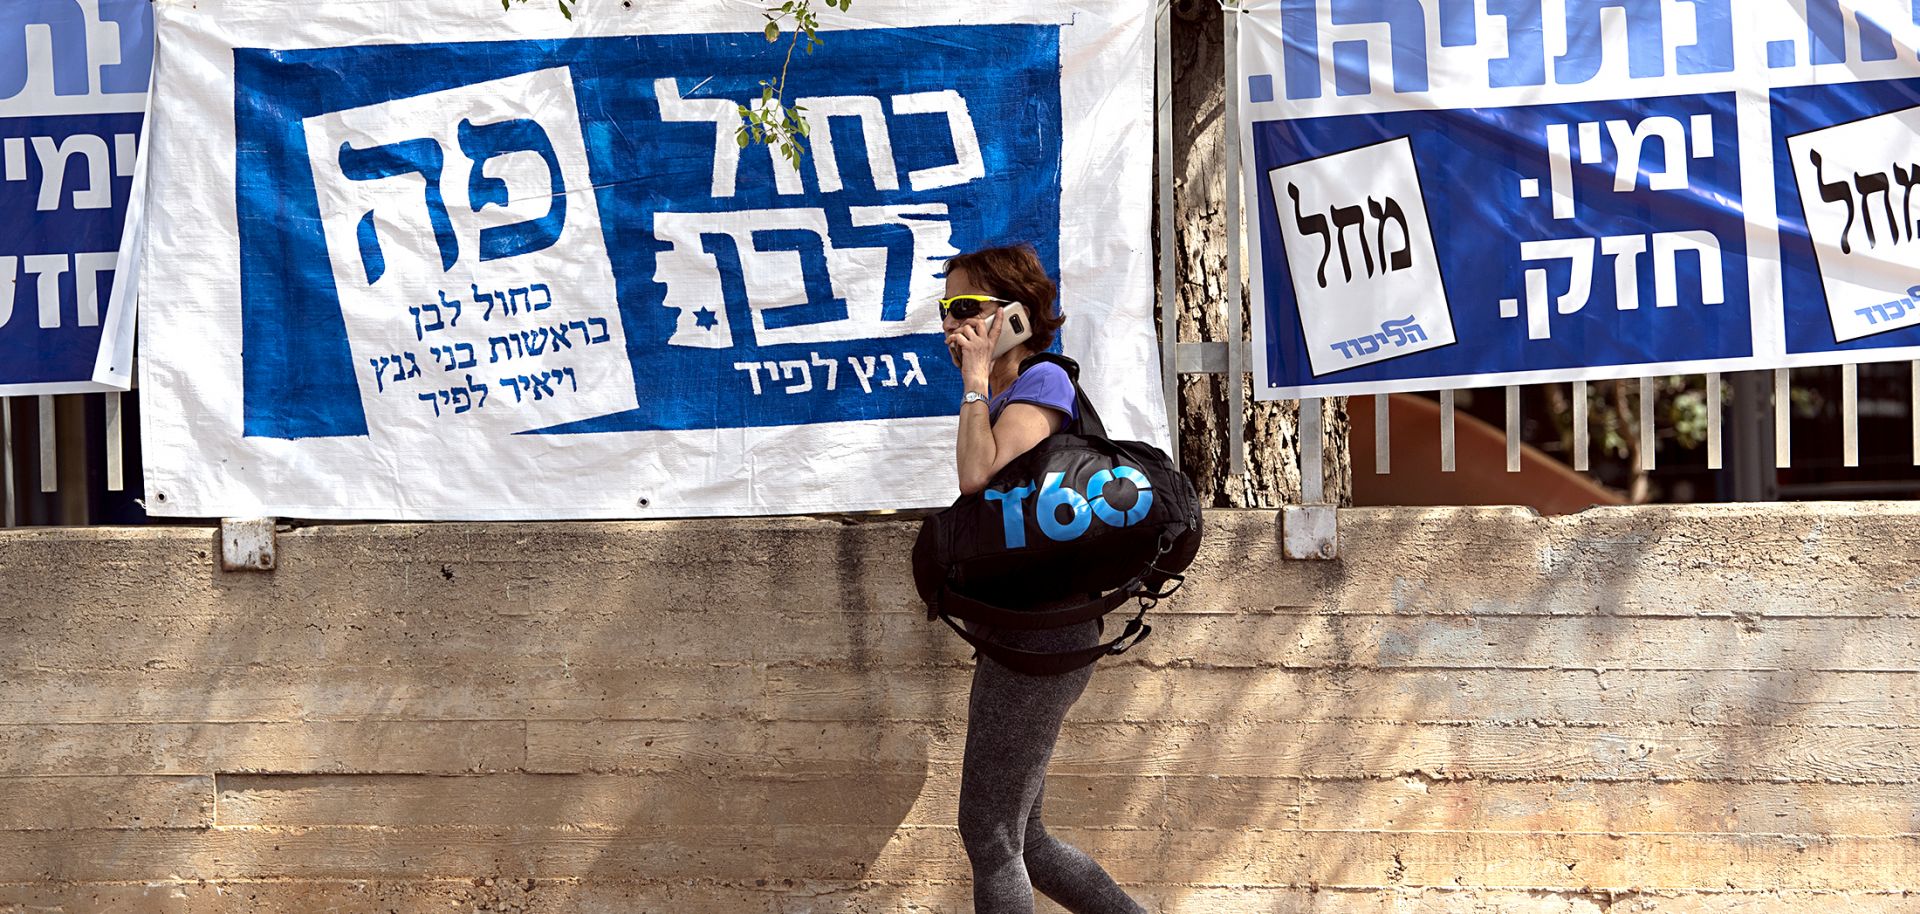 This photo shows a woman walking past election banners in Tel Aviv during Israel's elections on April 9, 2019.